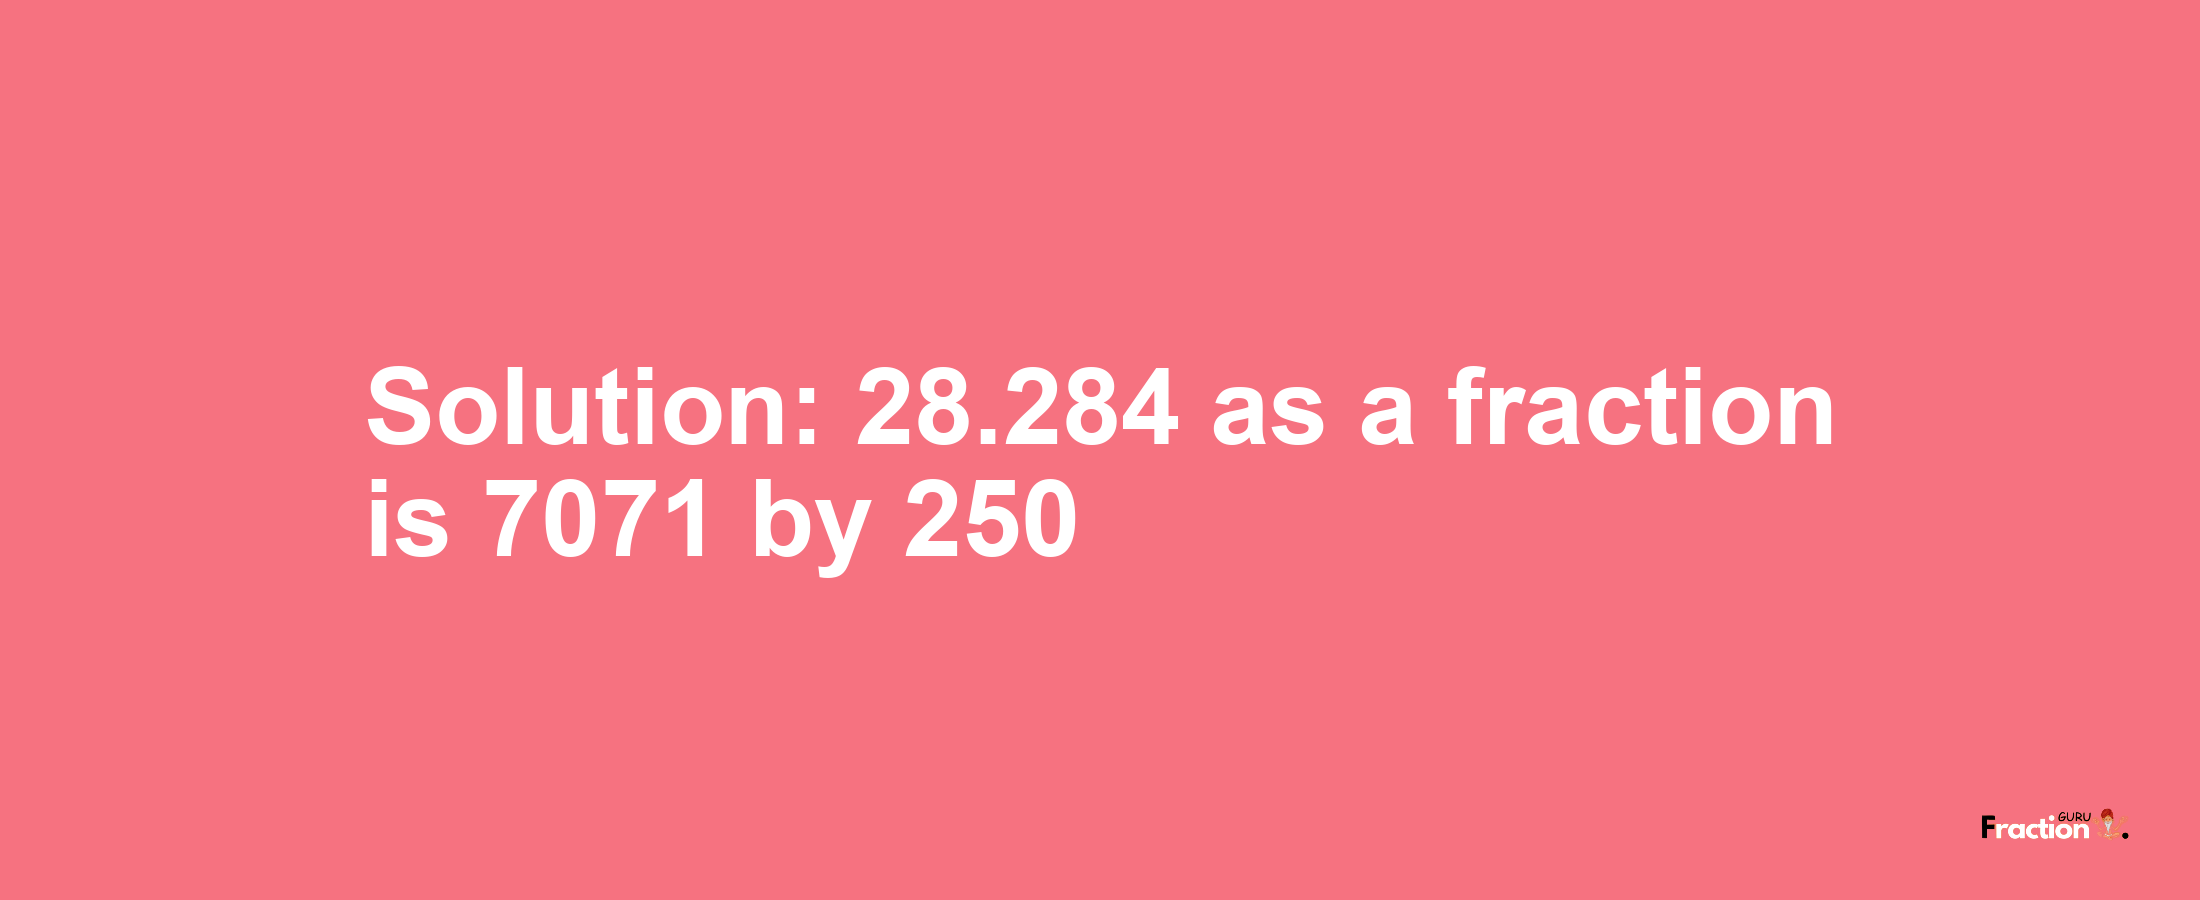 Solution:28.284 as a fraction is 7071/250